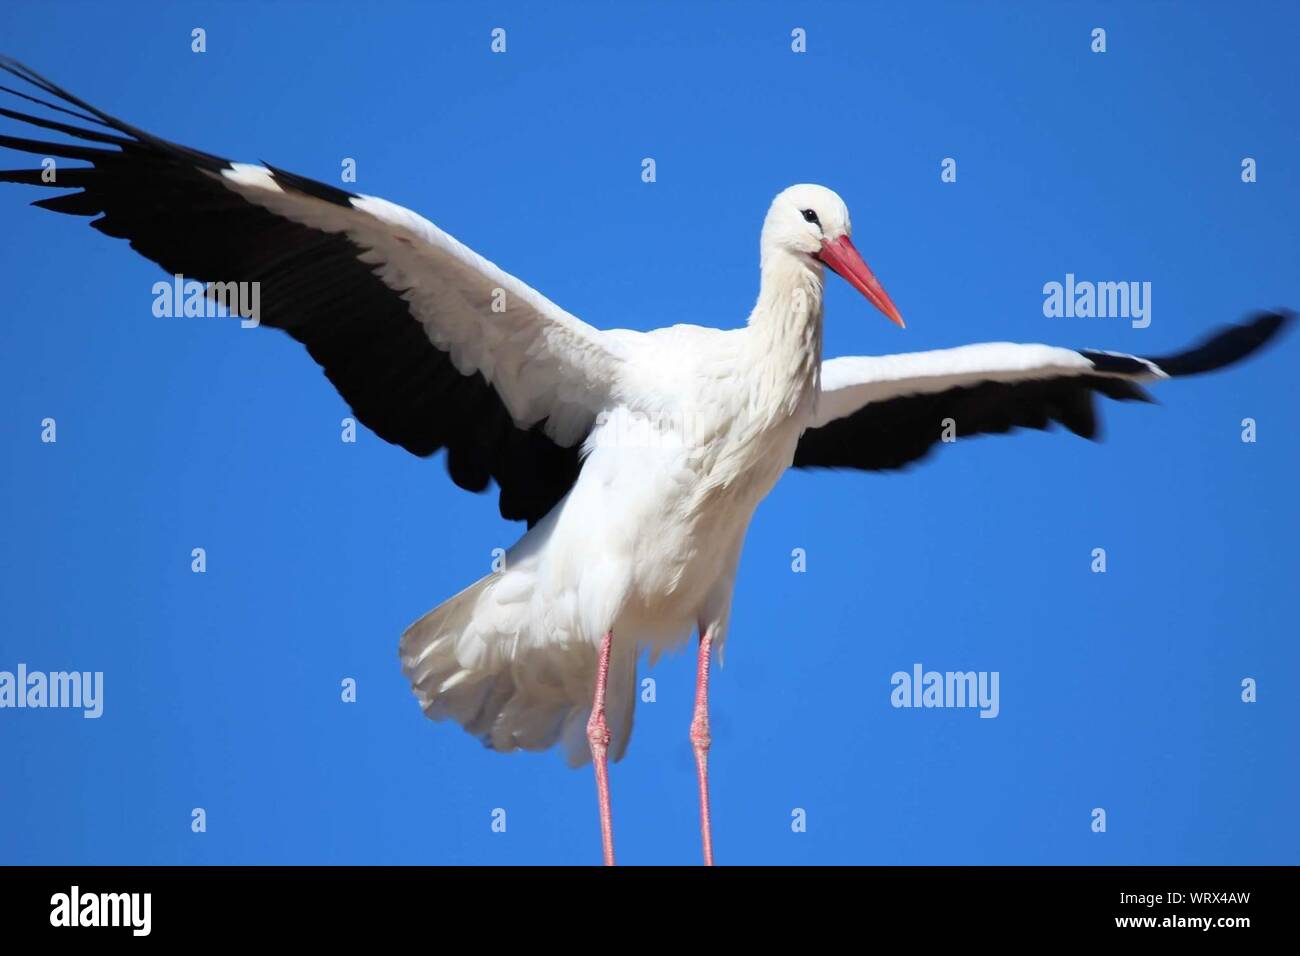 Low Angle View White Stork Flying Against Blue Sky Stock Photo